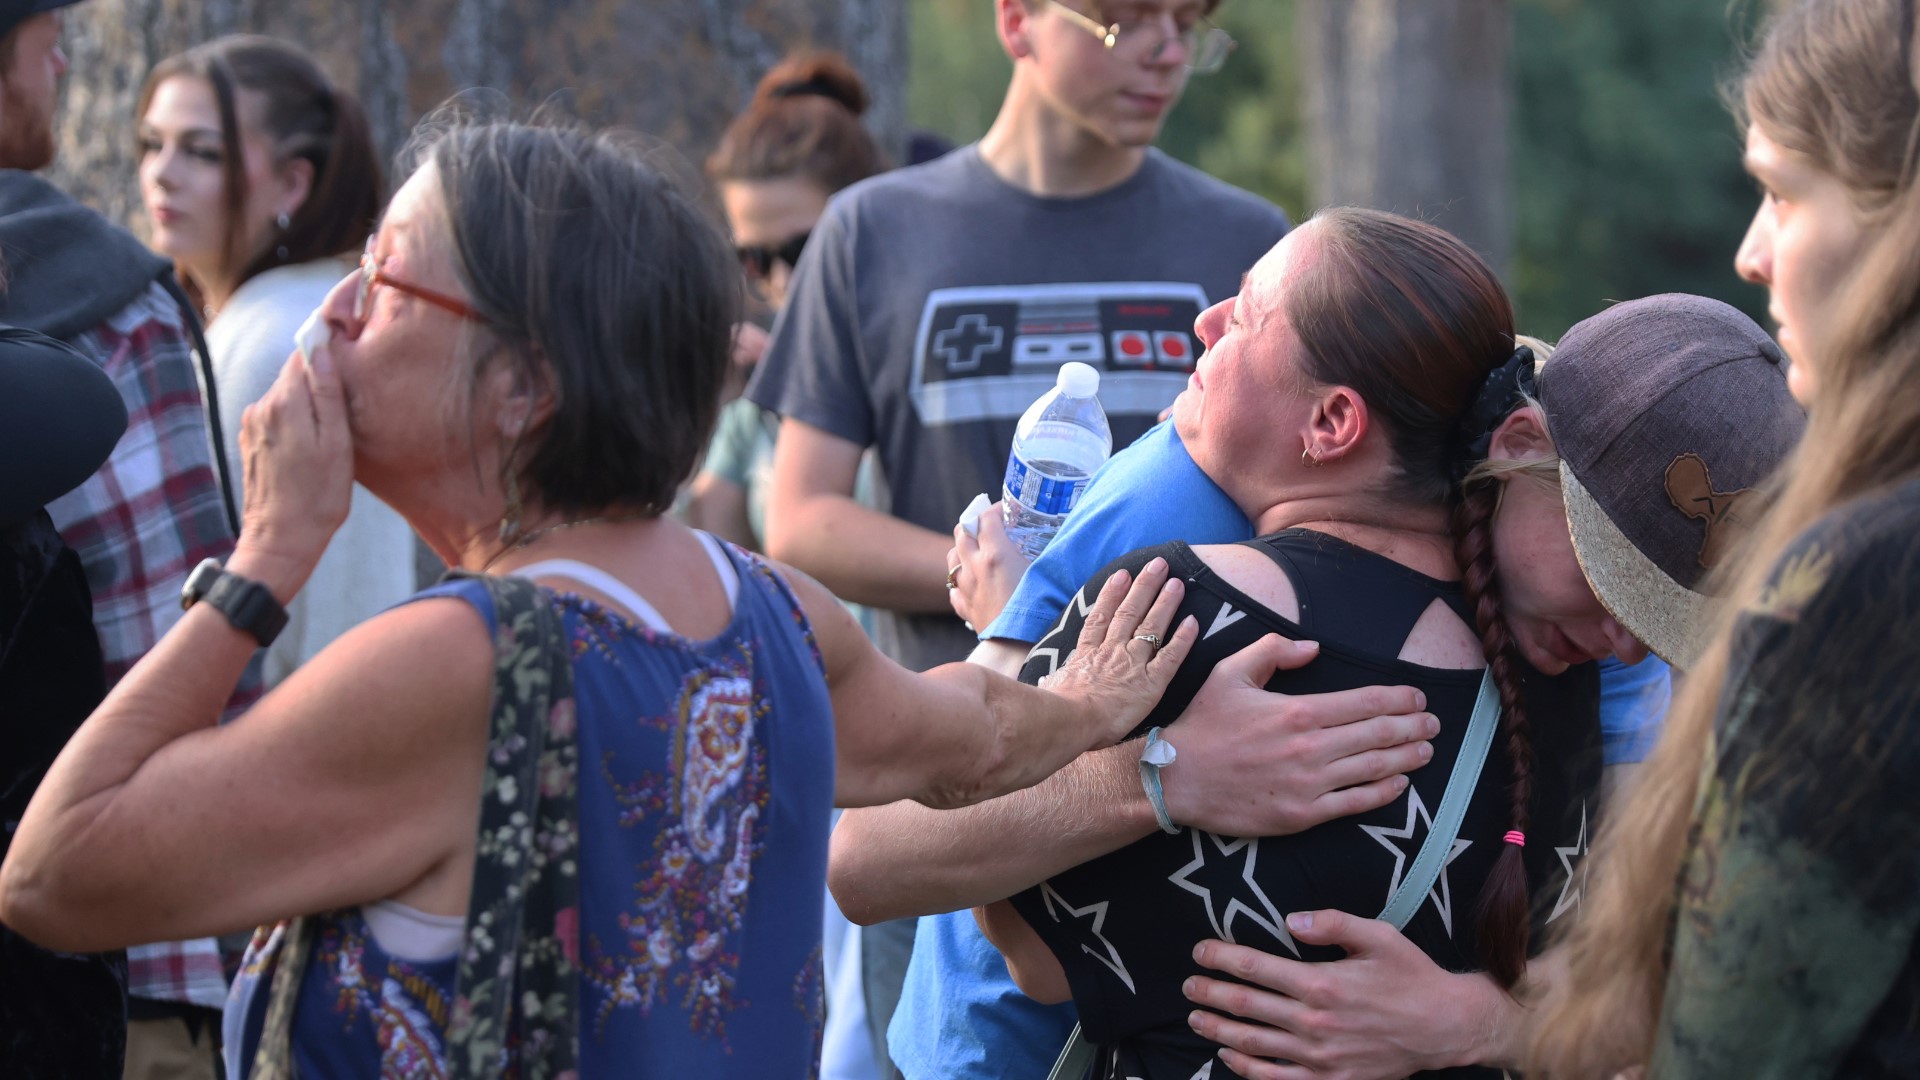 People in Bend shared messages of unity Monday night at a vigil to remember the victims of the Safeway shooting. Three people died including the alleged shooter.